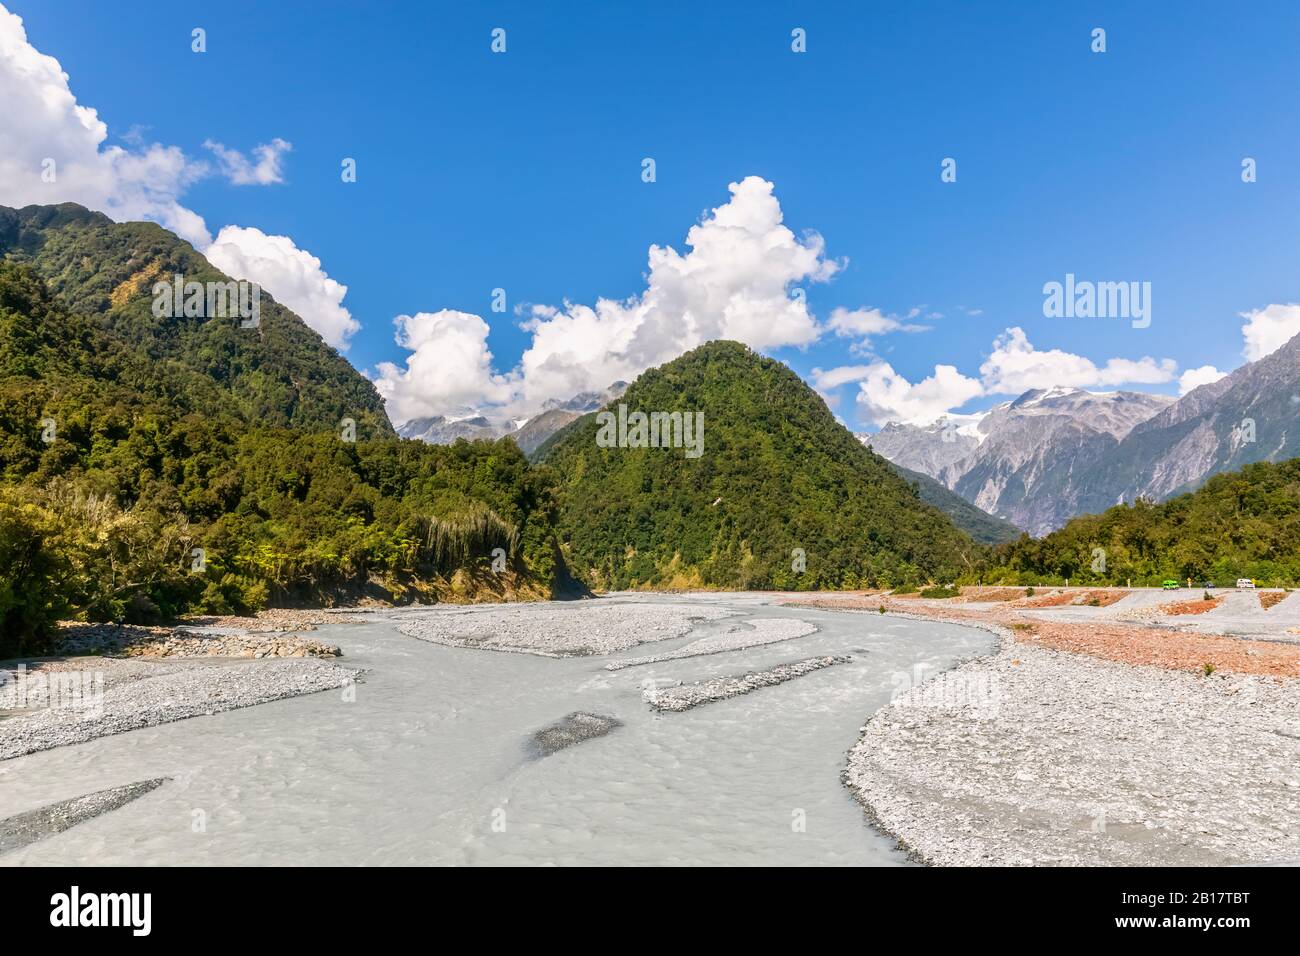 New Zealand, Westland District, Franz Josef, Scenic view of Waiho River with forested mountains in background Stock Photo